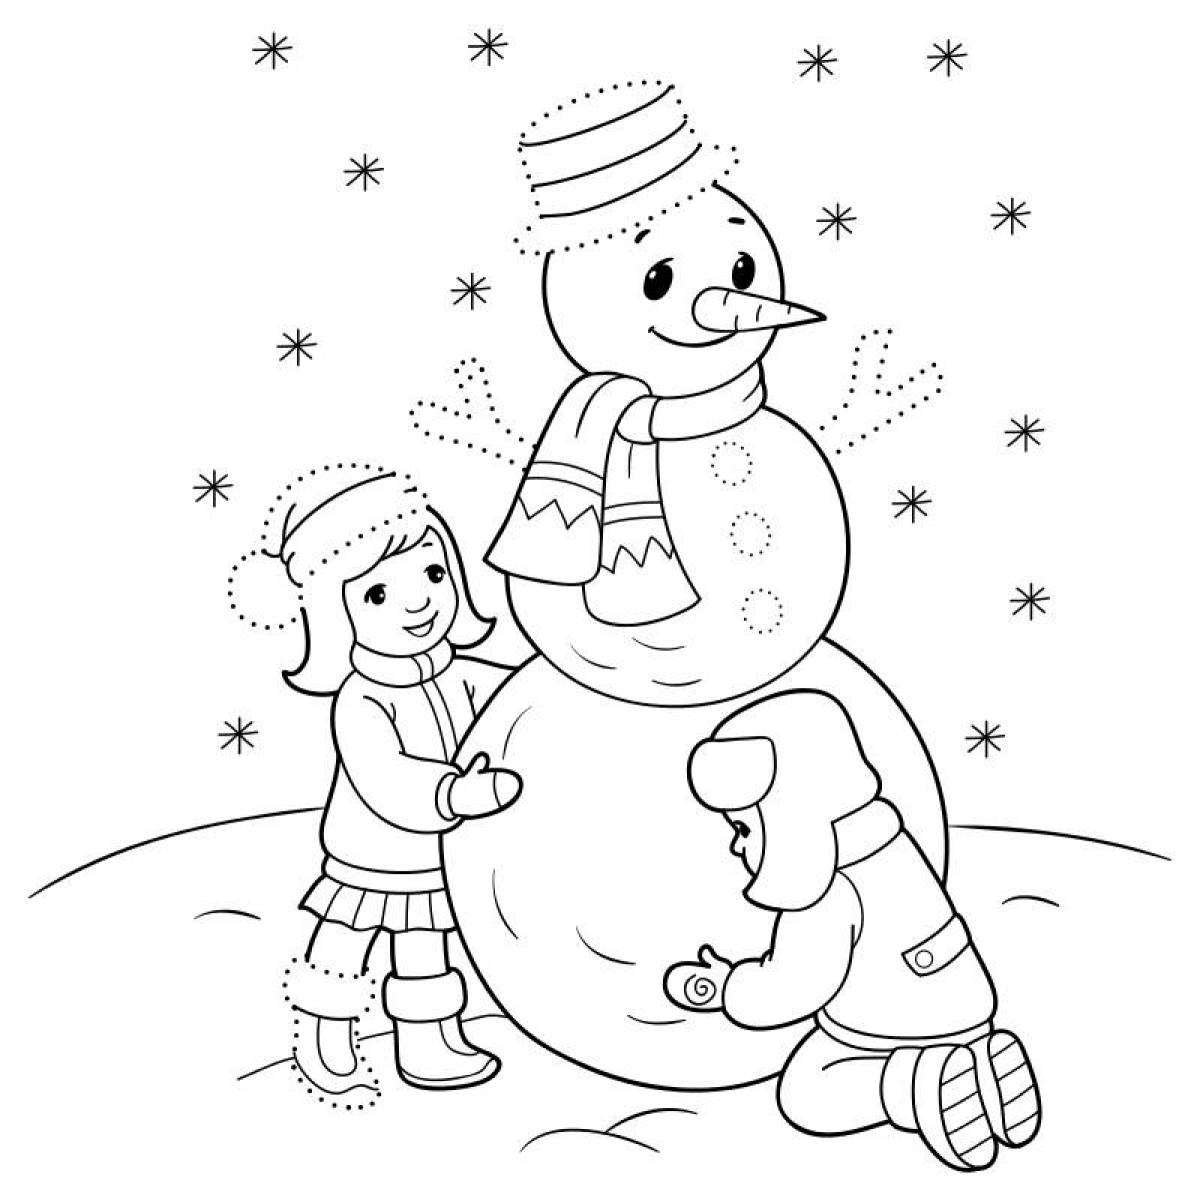 Vivid winter coloring book for 4-5 year olds